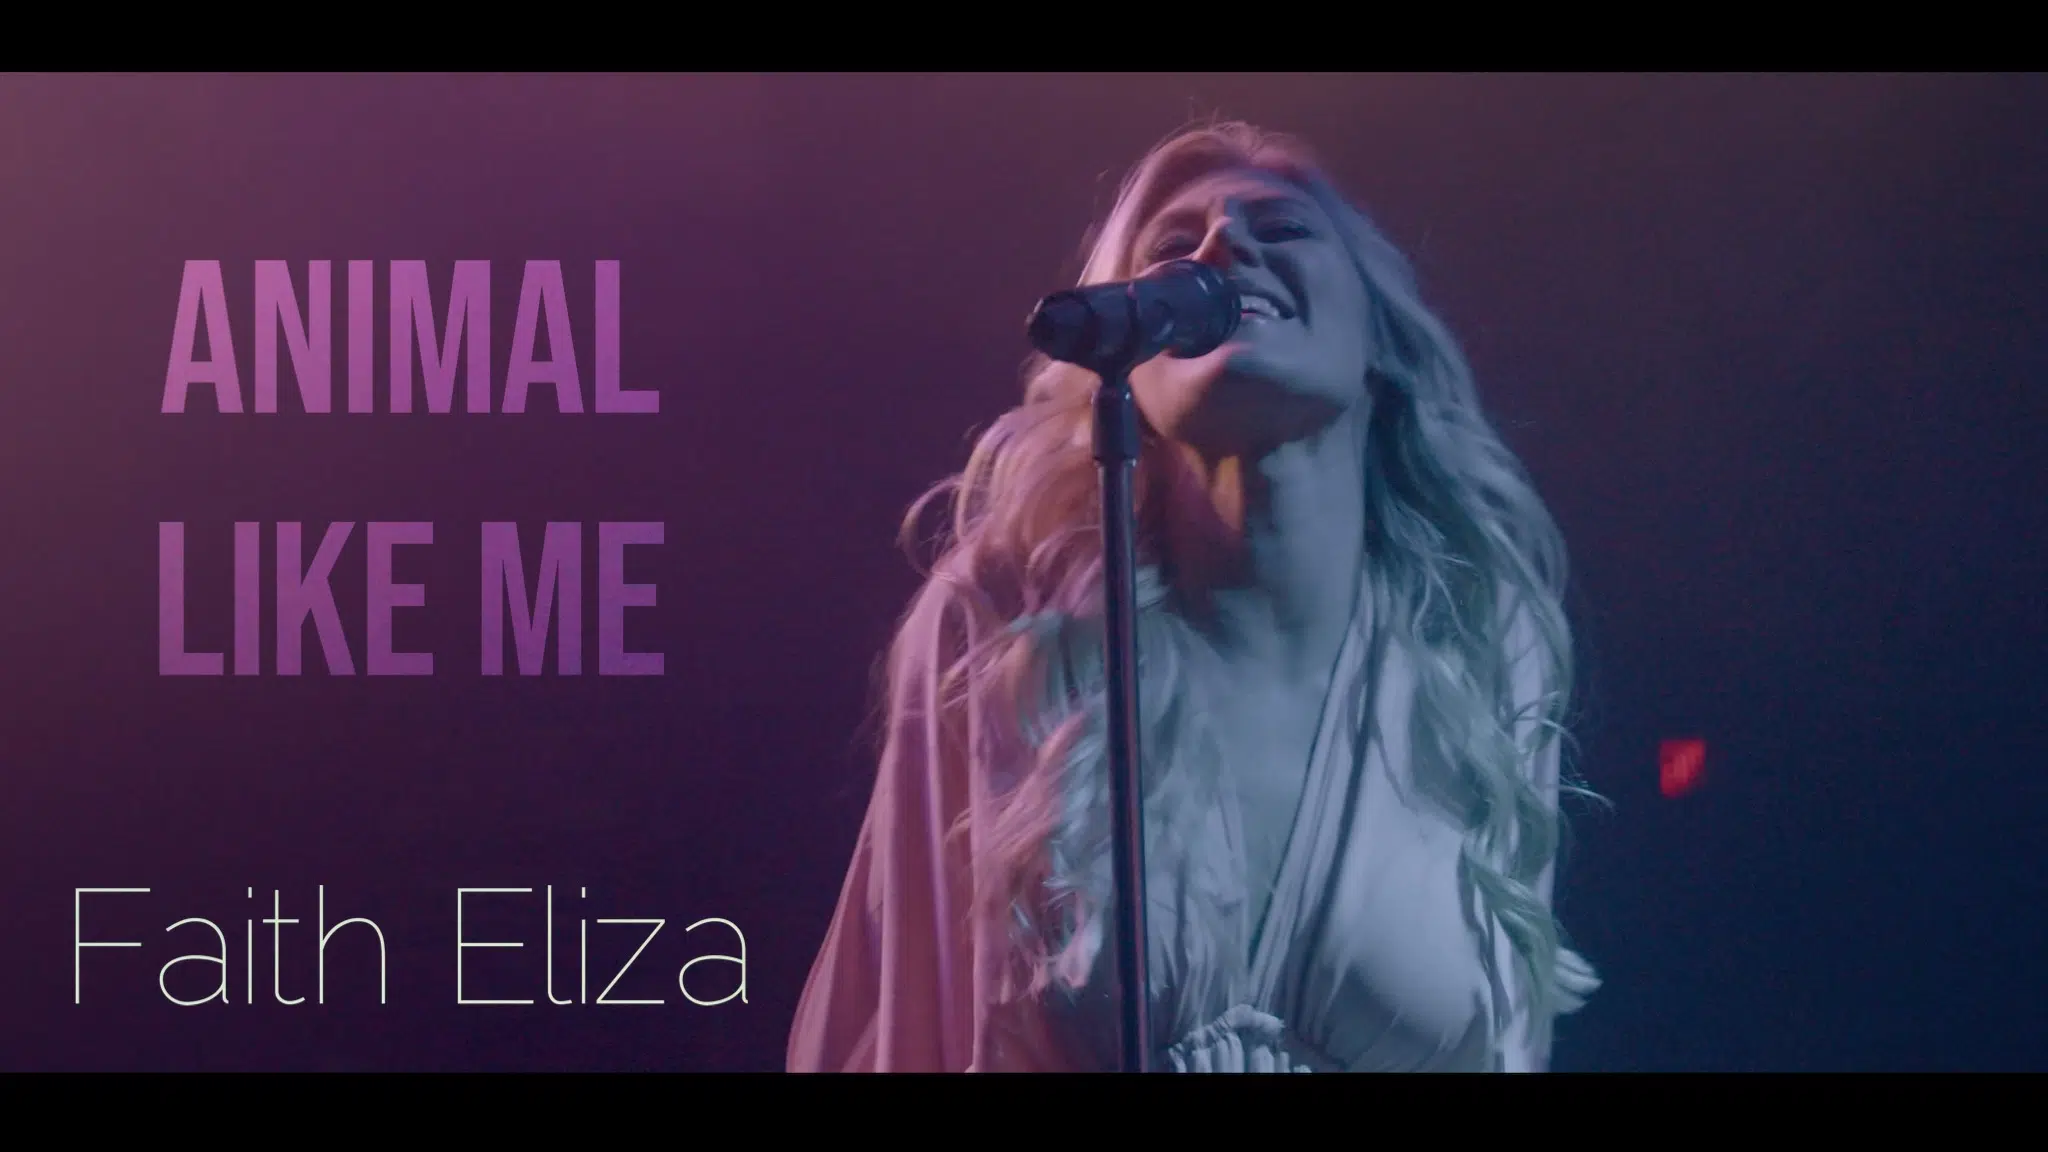 Closer Look at 'Animal Like Me' by Faith Eliza Music